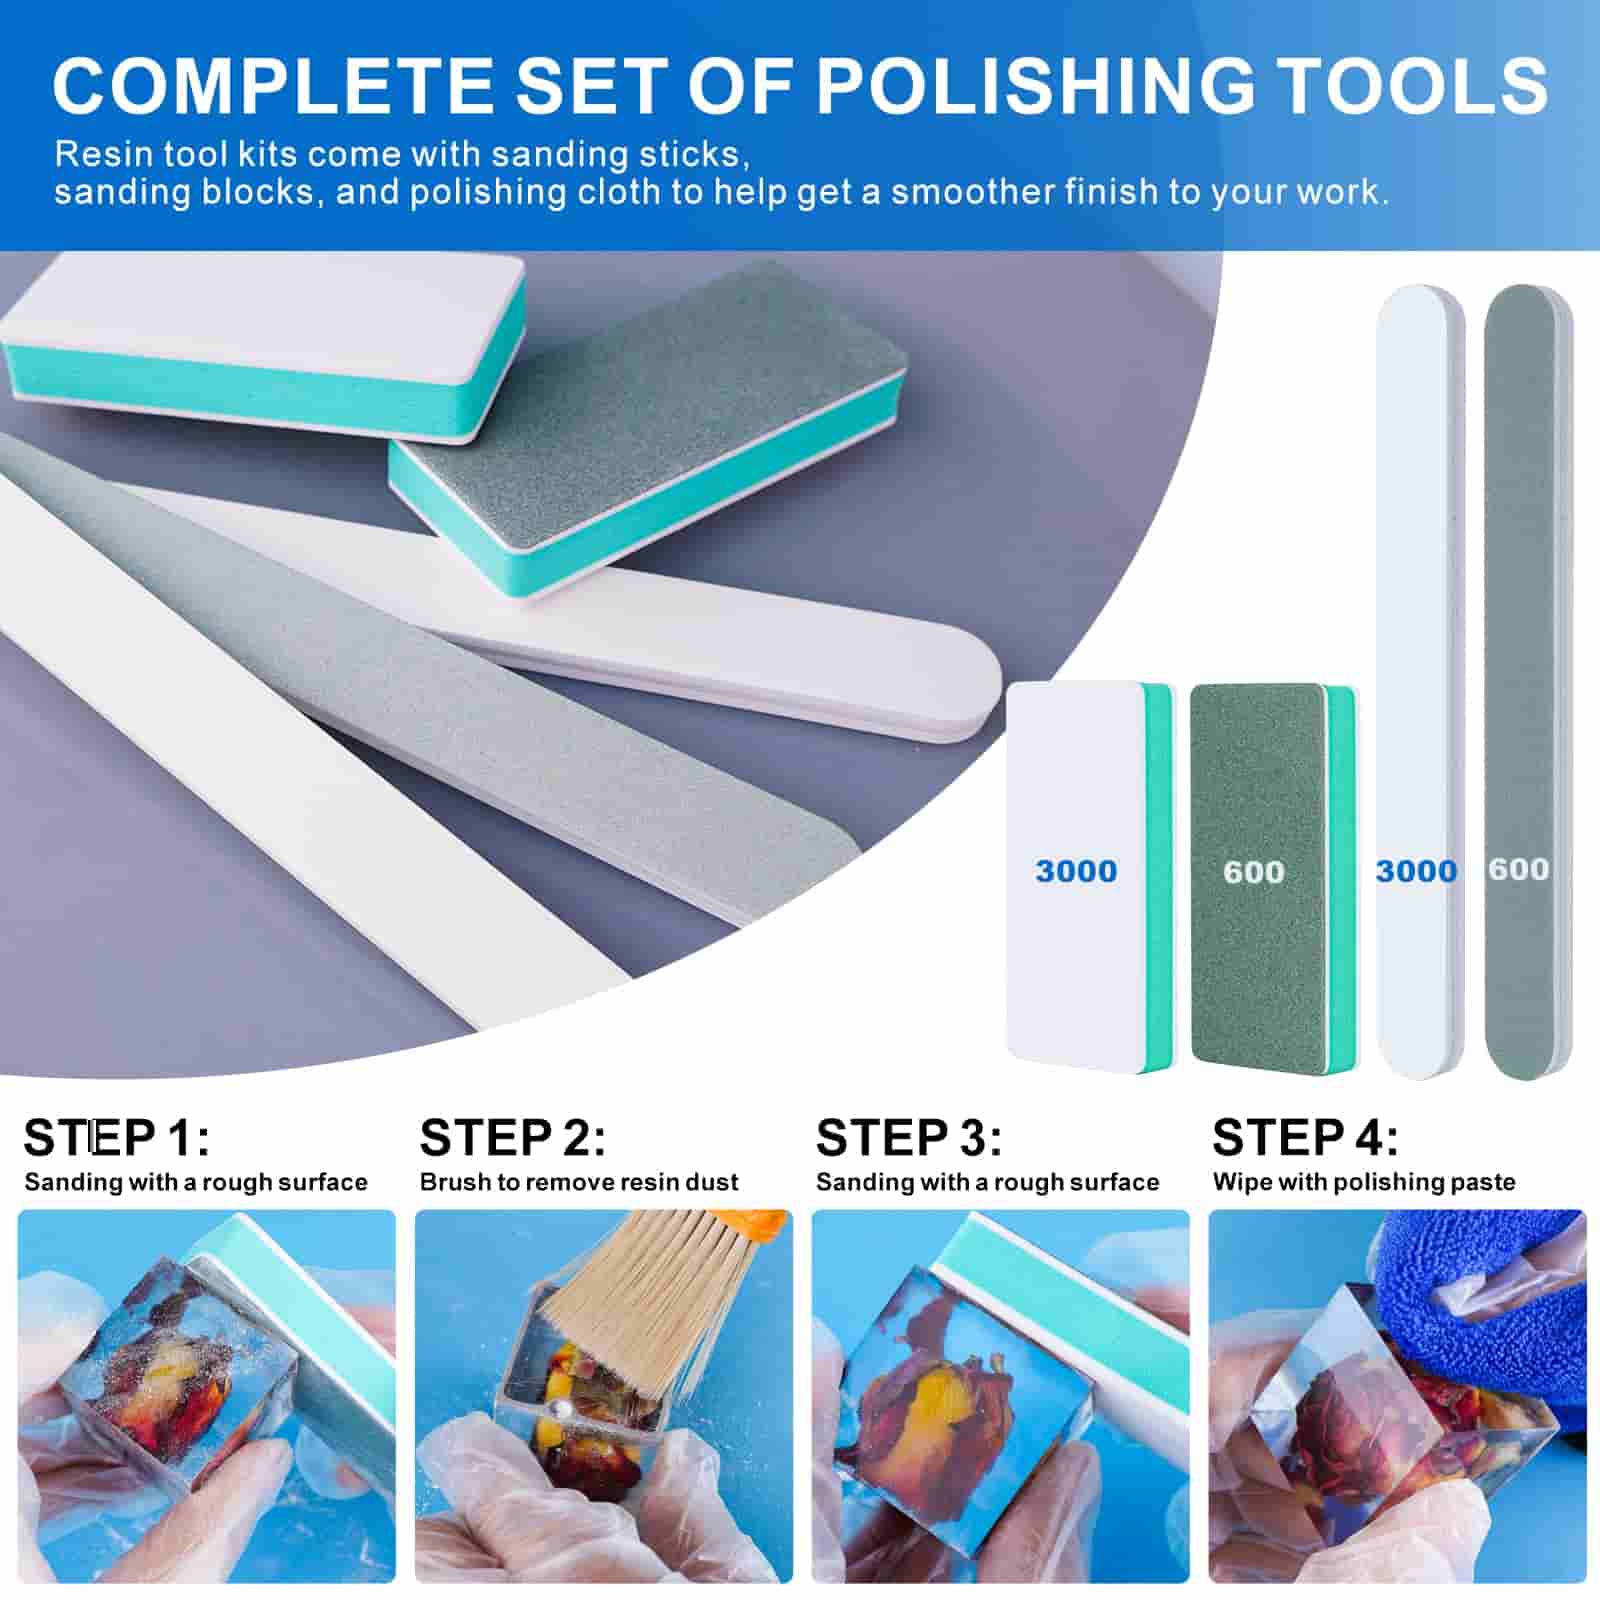 Polishing & Cleaning Kit For Epoxy Resin â€œ Remove Scratches From